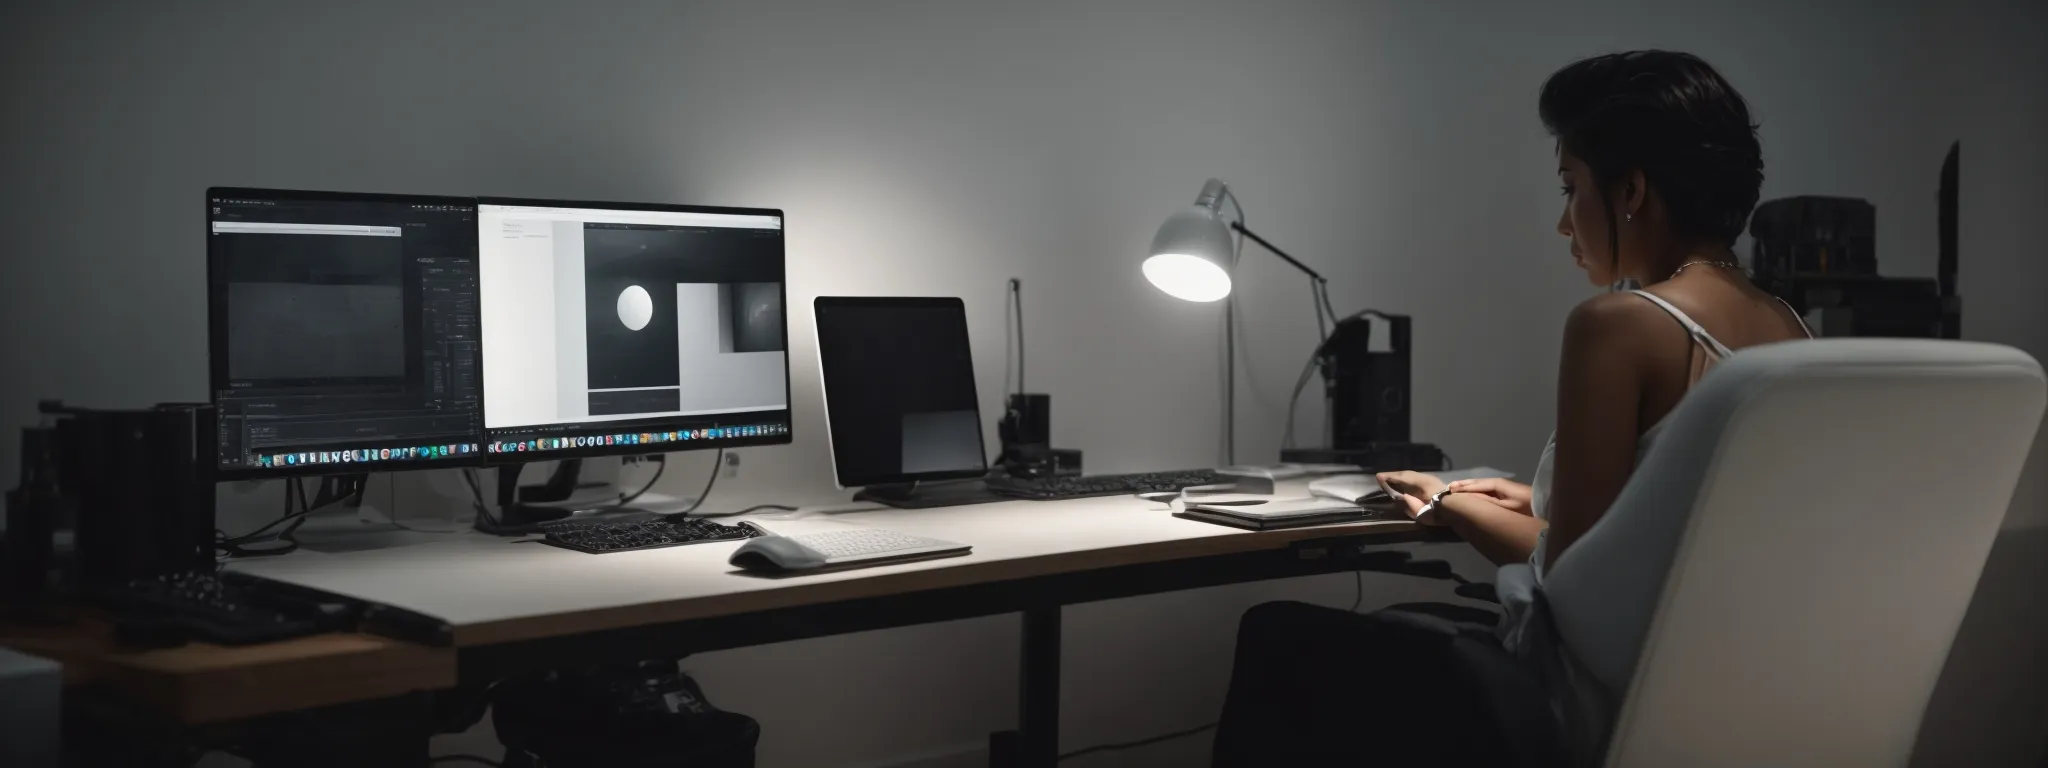 A Designer Thoughtfully Clicks In A Modern, Minimalistic Studio, The Computer Screen Glowing With A Sleek Website In Progress.